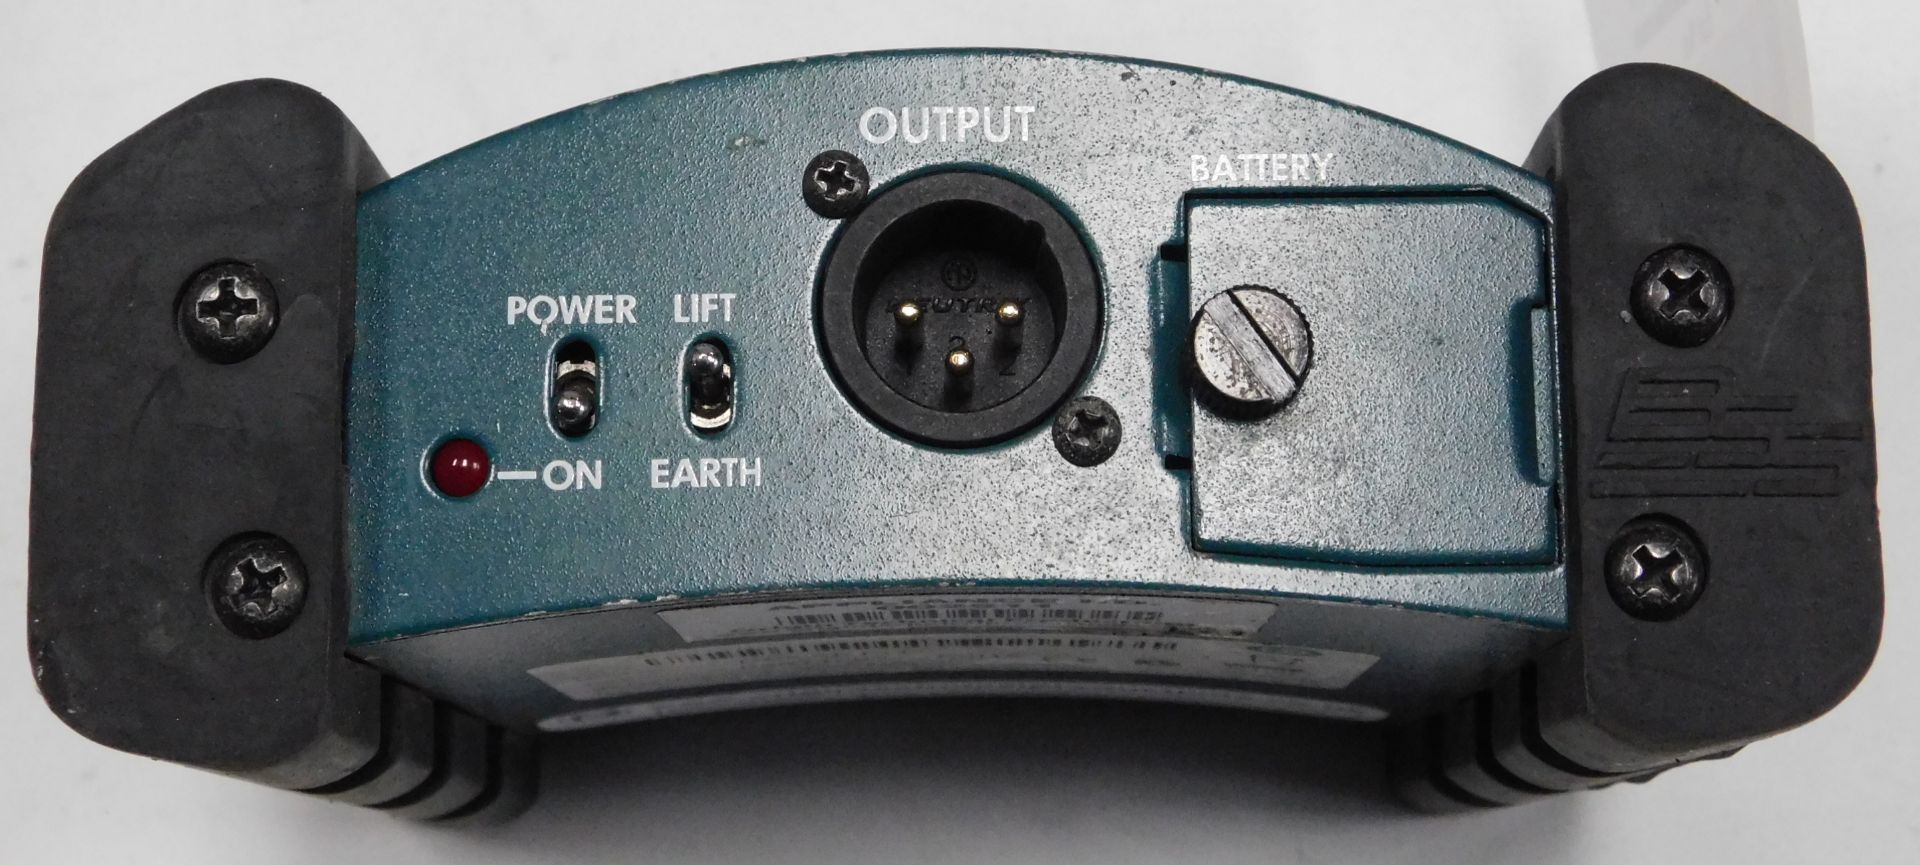 Zero-88 Betapack Plus 6 Way Dimmer (Location: Brentwood. Please Refer to General Notes) - Image 3 of 8